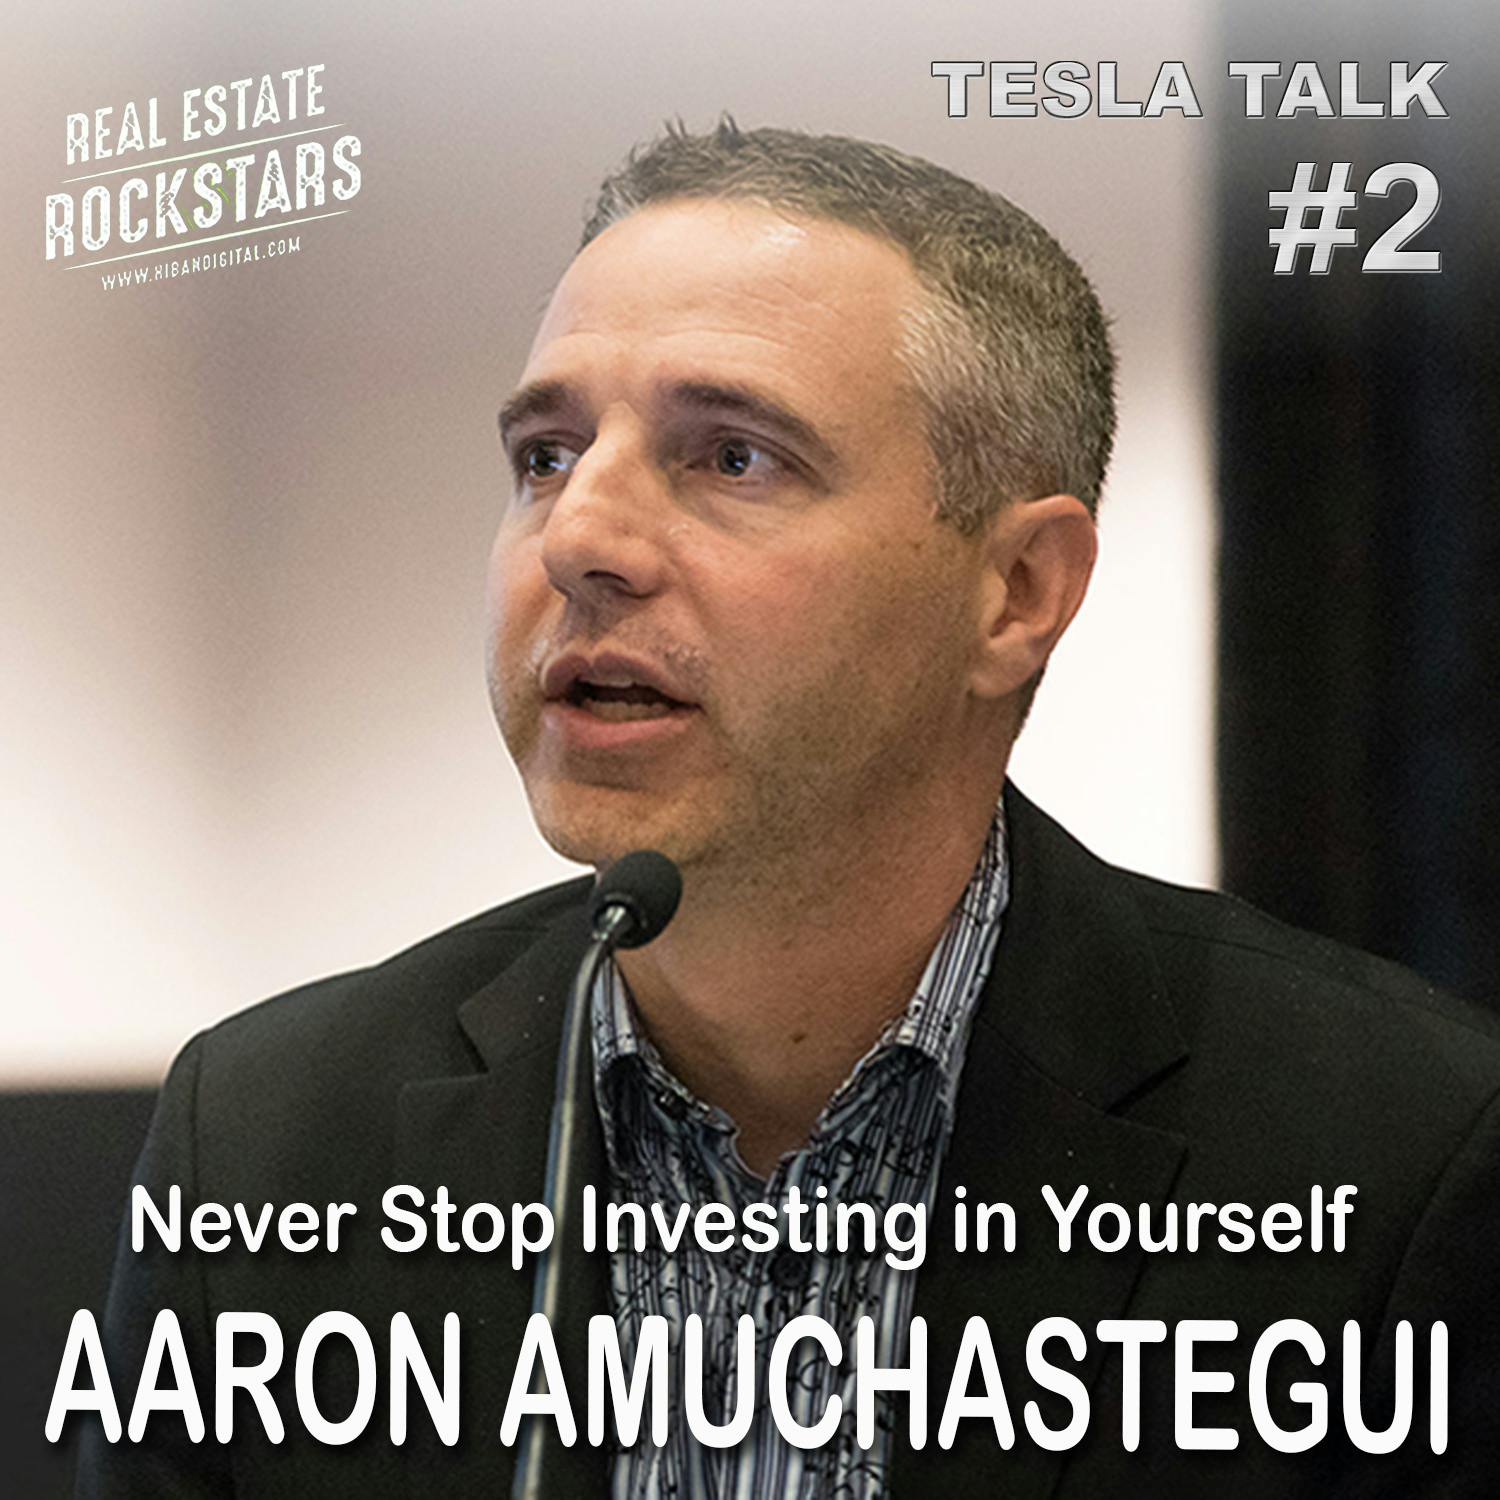 Tesla Talk 2: Never Stop Investing in Yourself